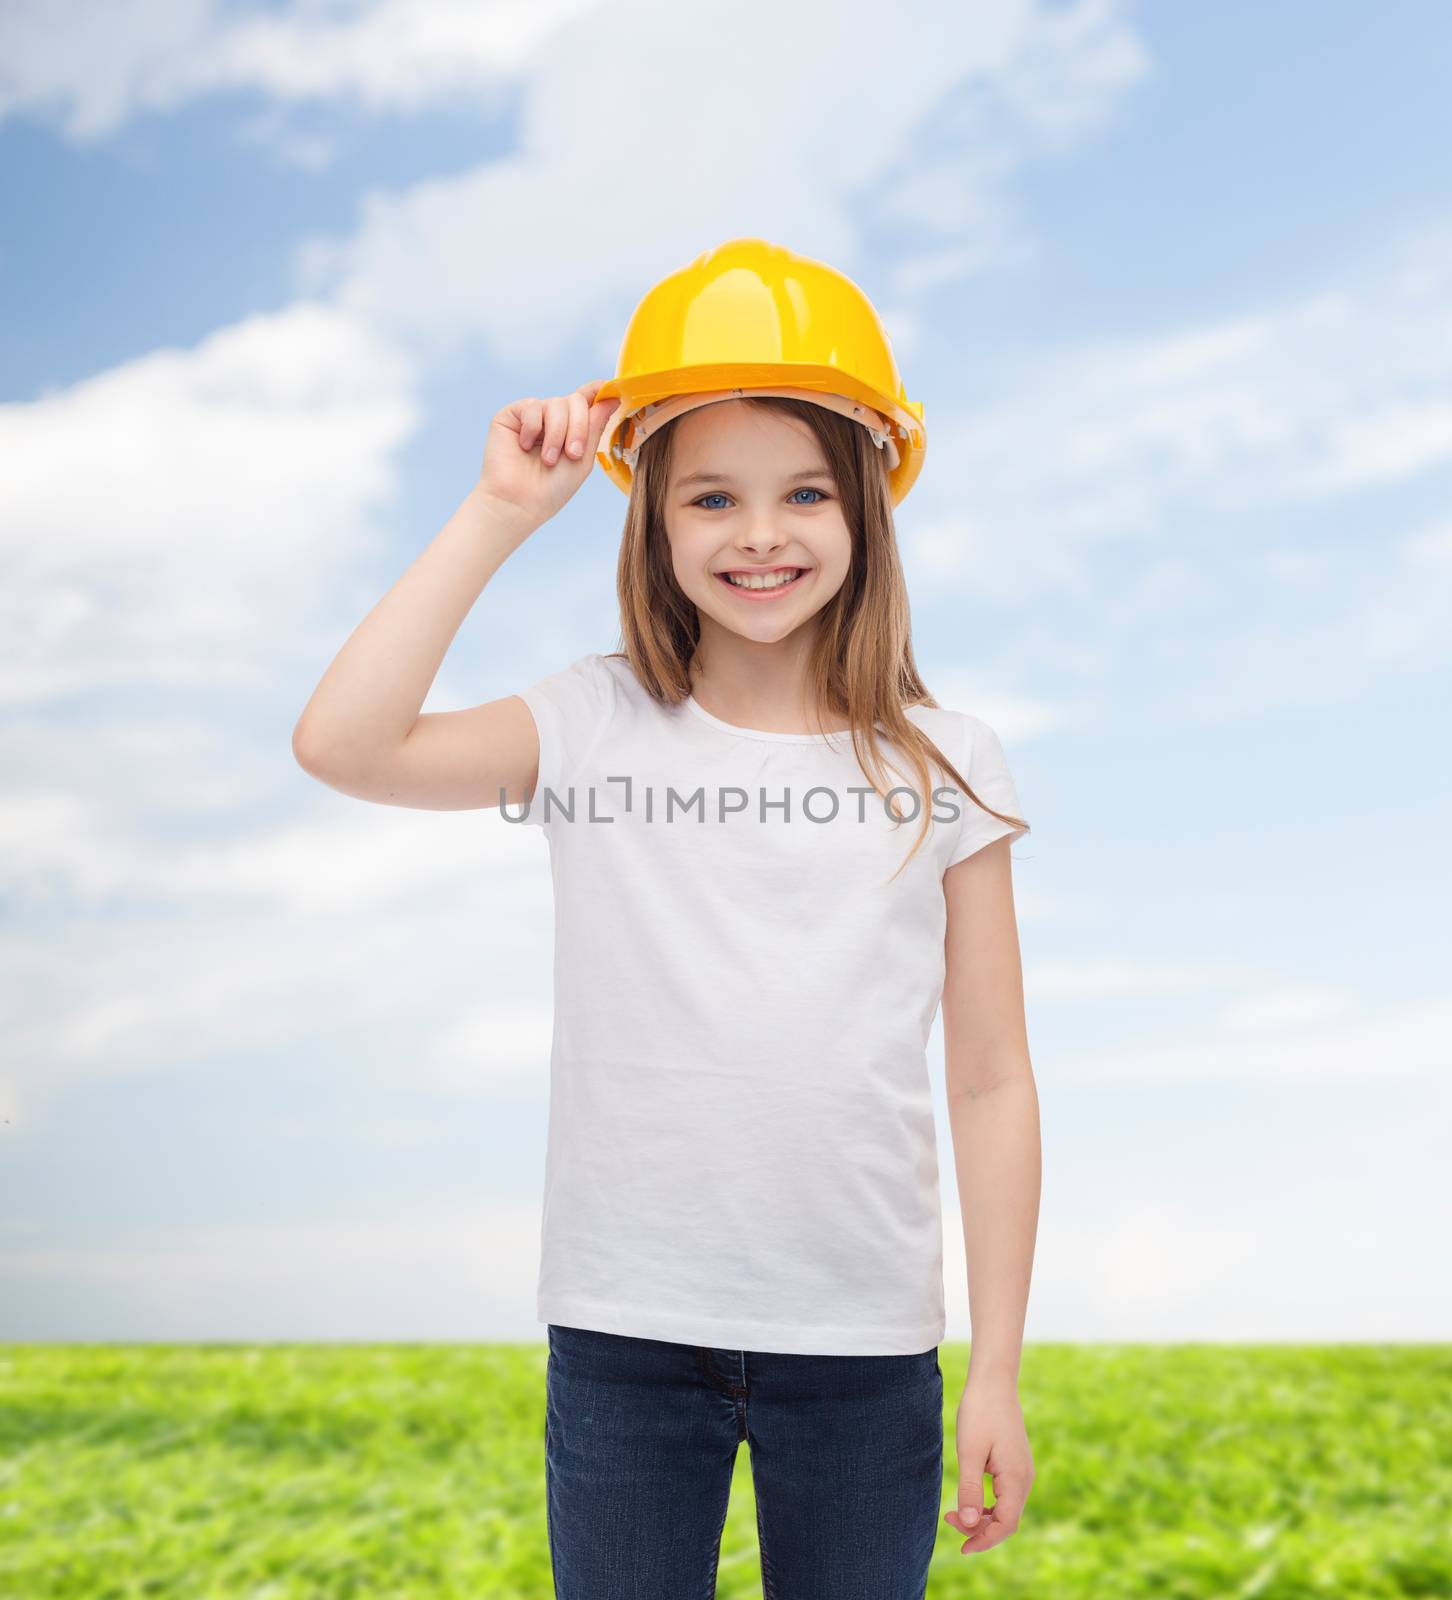 construction and people concept - smiling little girl in protective helmet